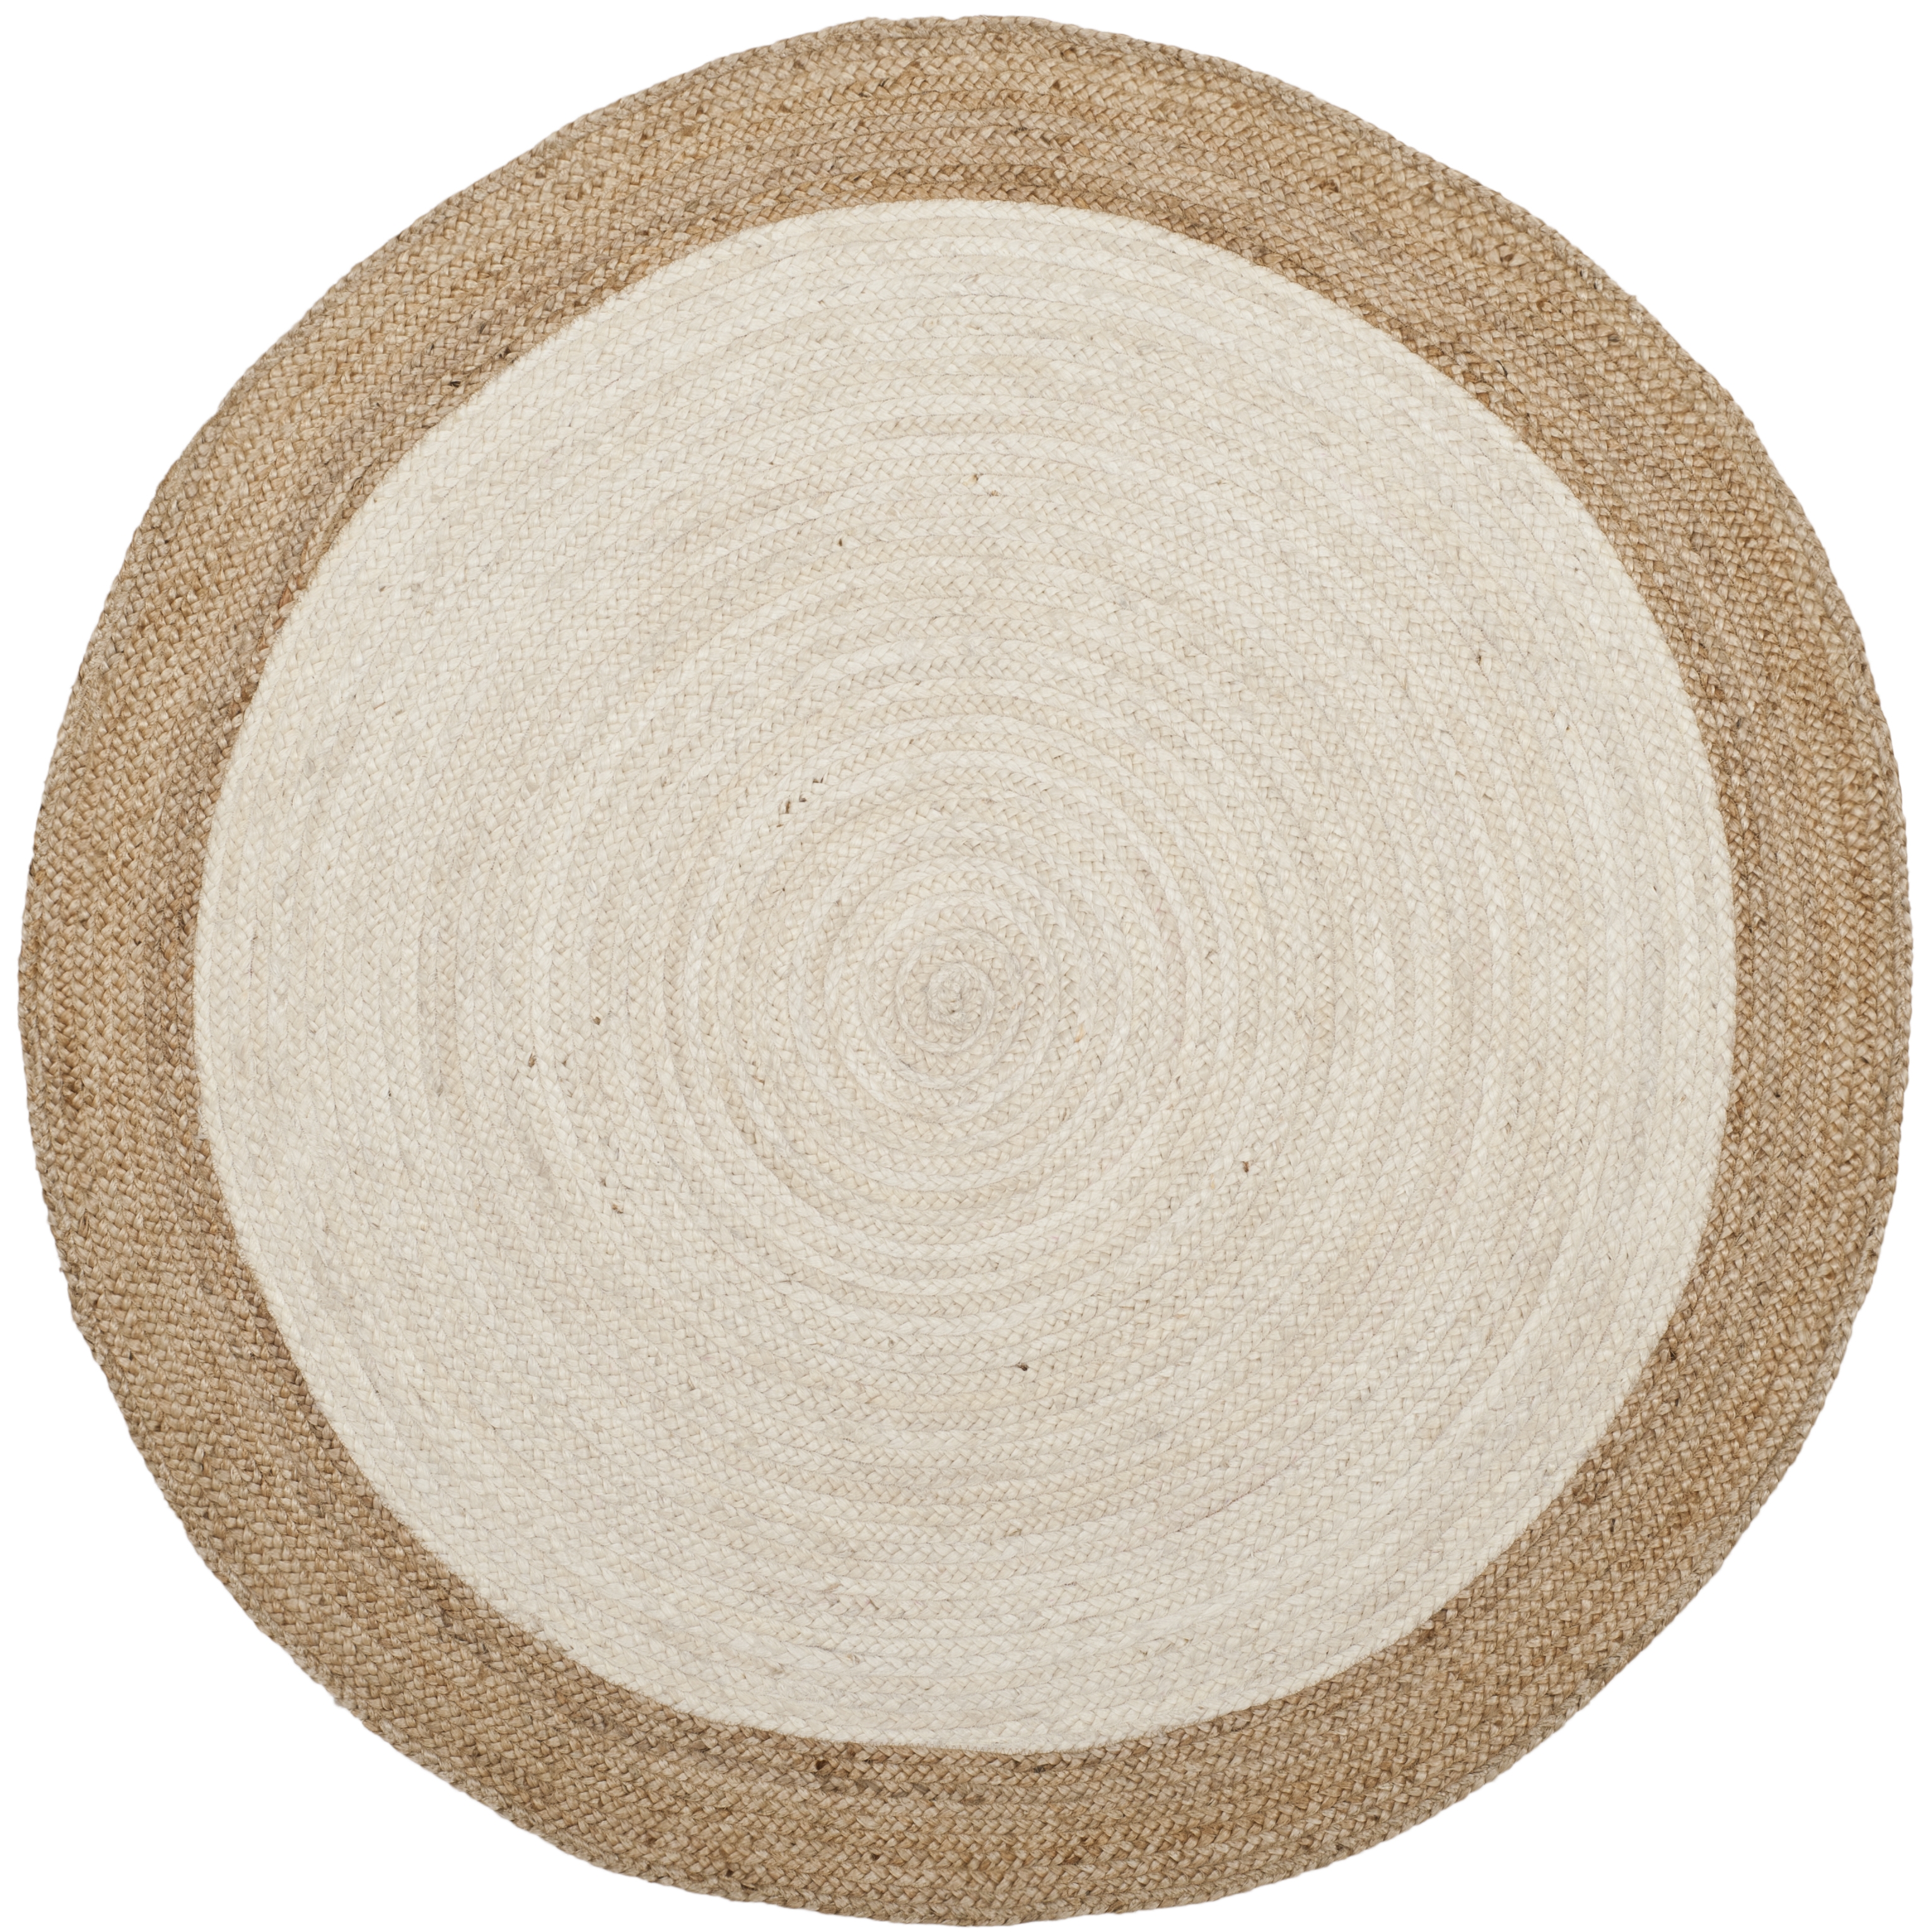 Arlo Home Hand Woven Area Rug, NF801M, Ivory/Natural,  5' X 5' Round - Image 0